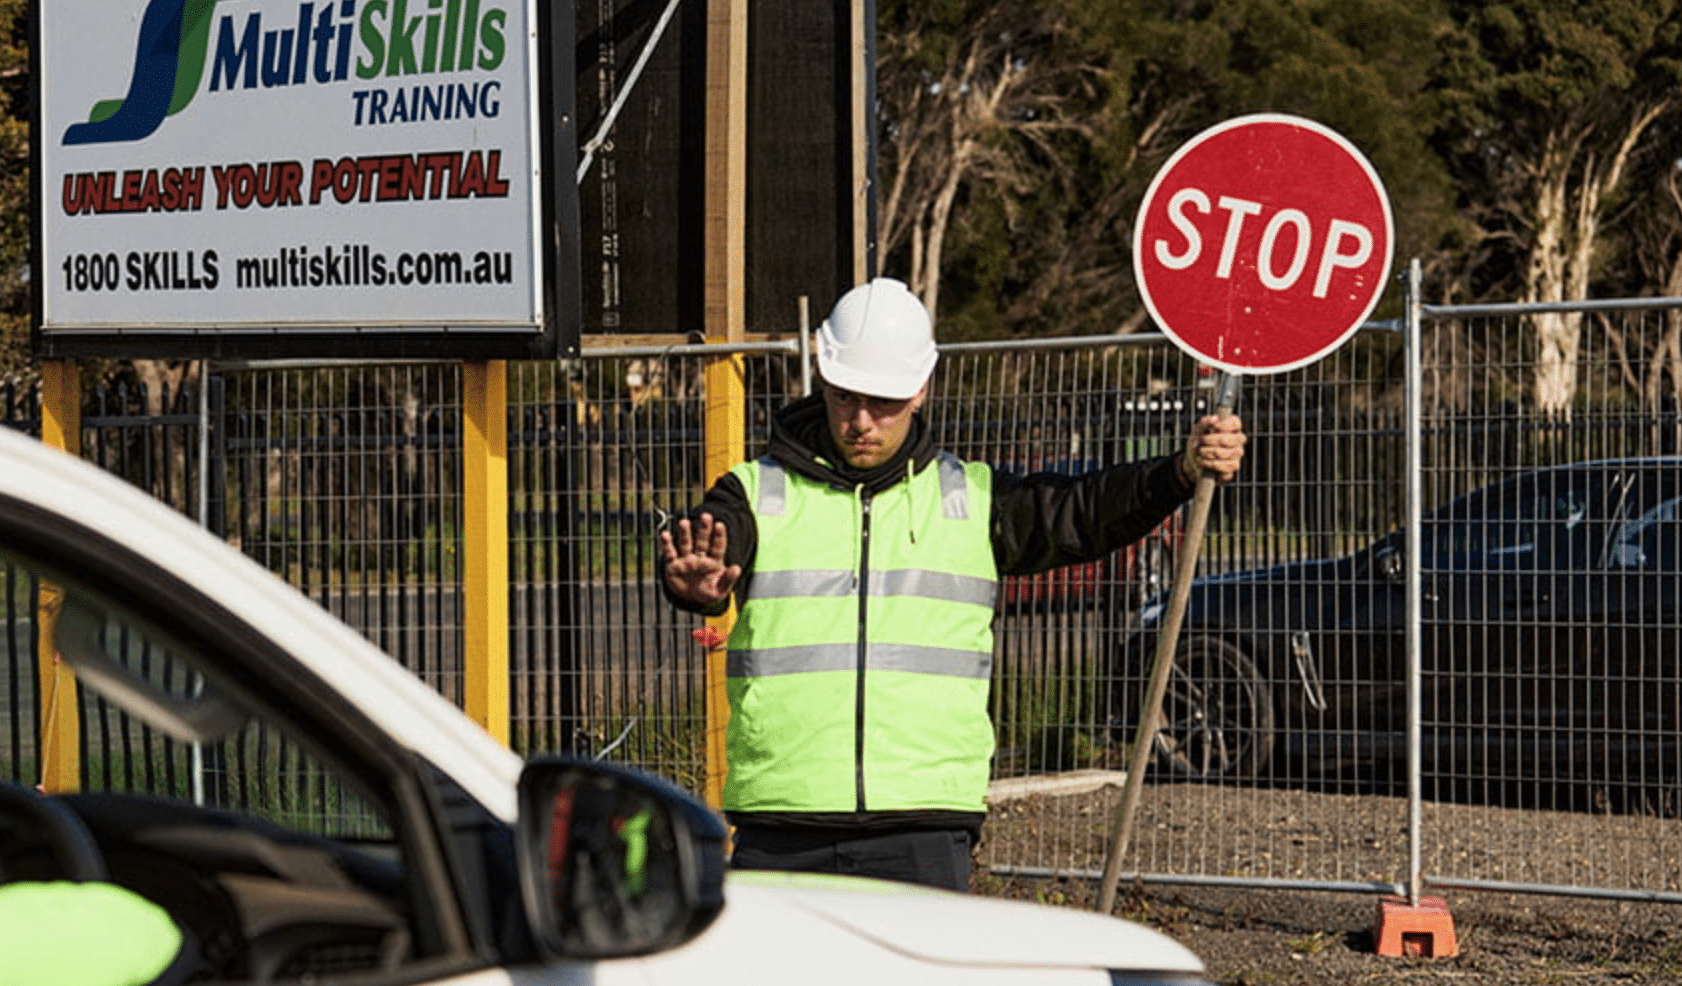 Who Is Authorised To Act As A Traffic Controller in Victoria?